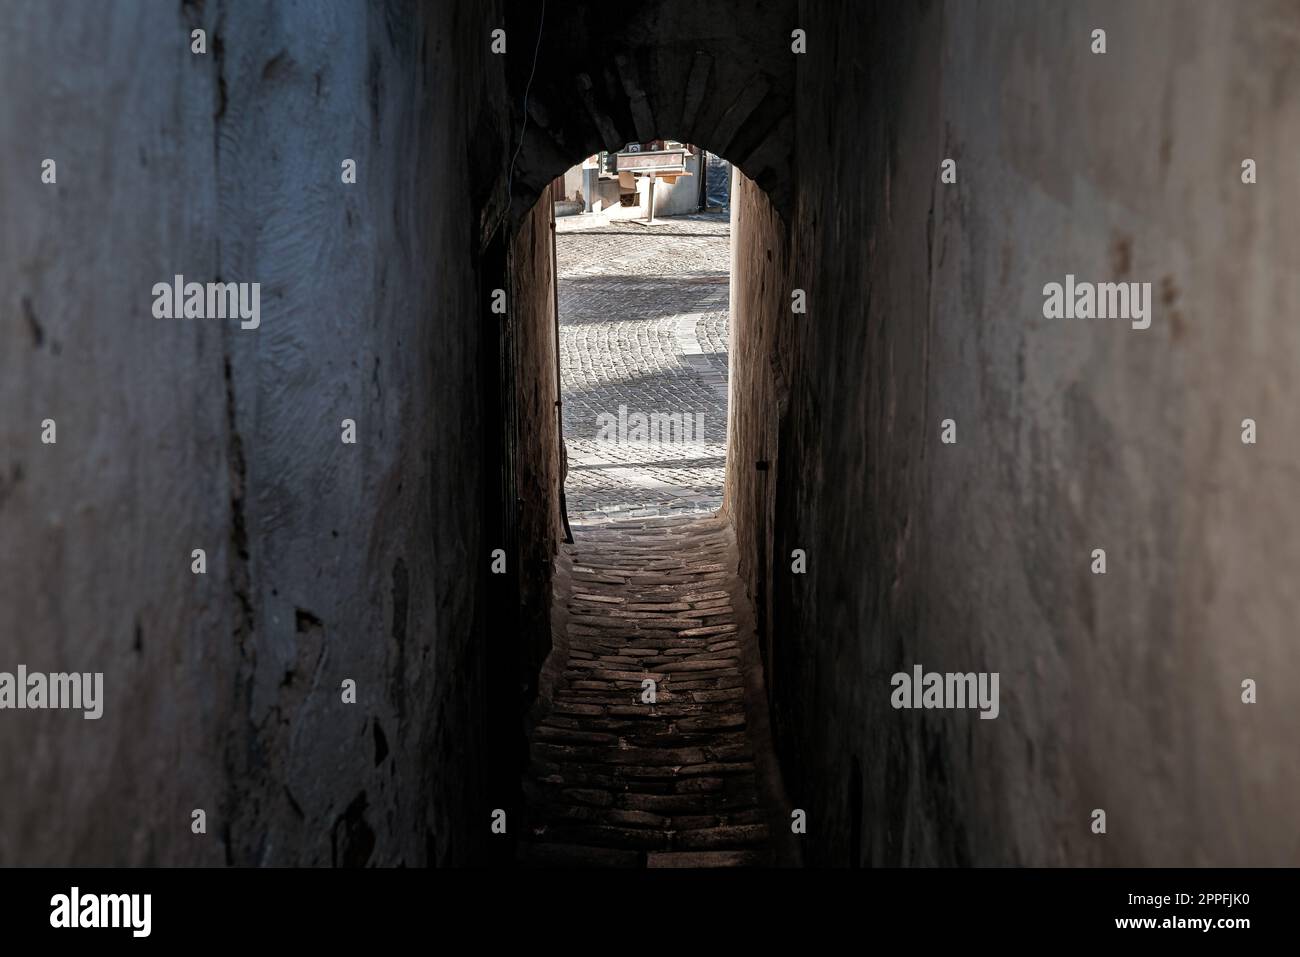 Narrow tunnel passage between buildings at Szentendre, Hungary Stock Photo